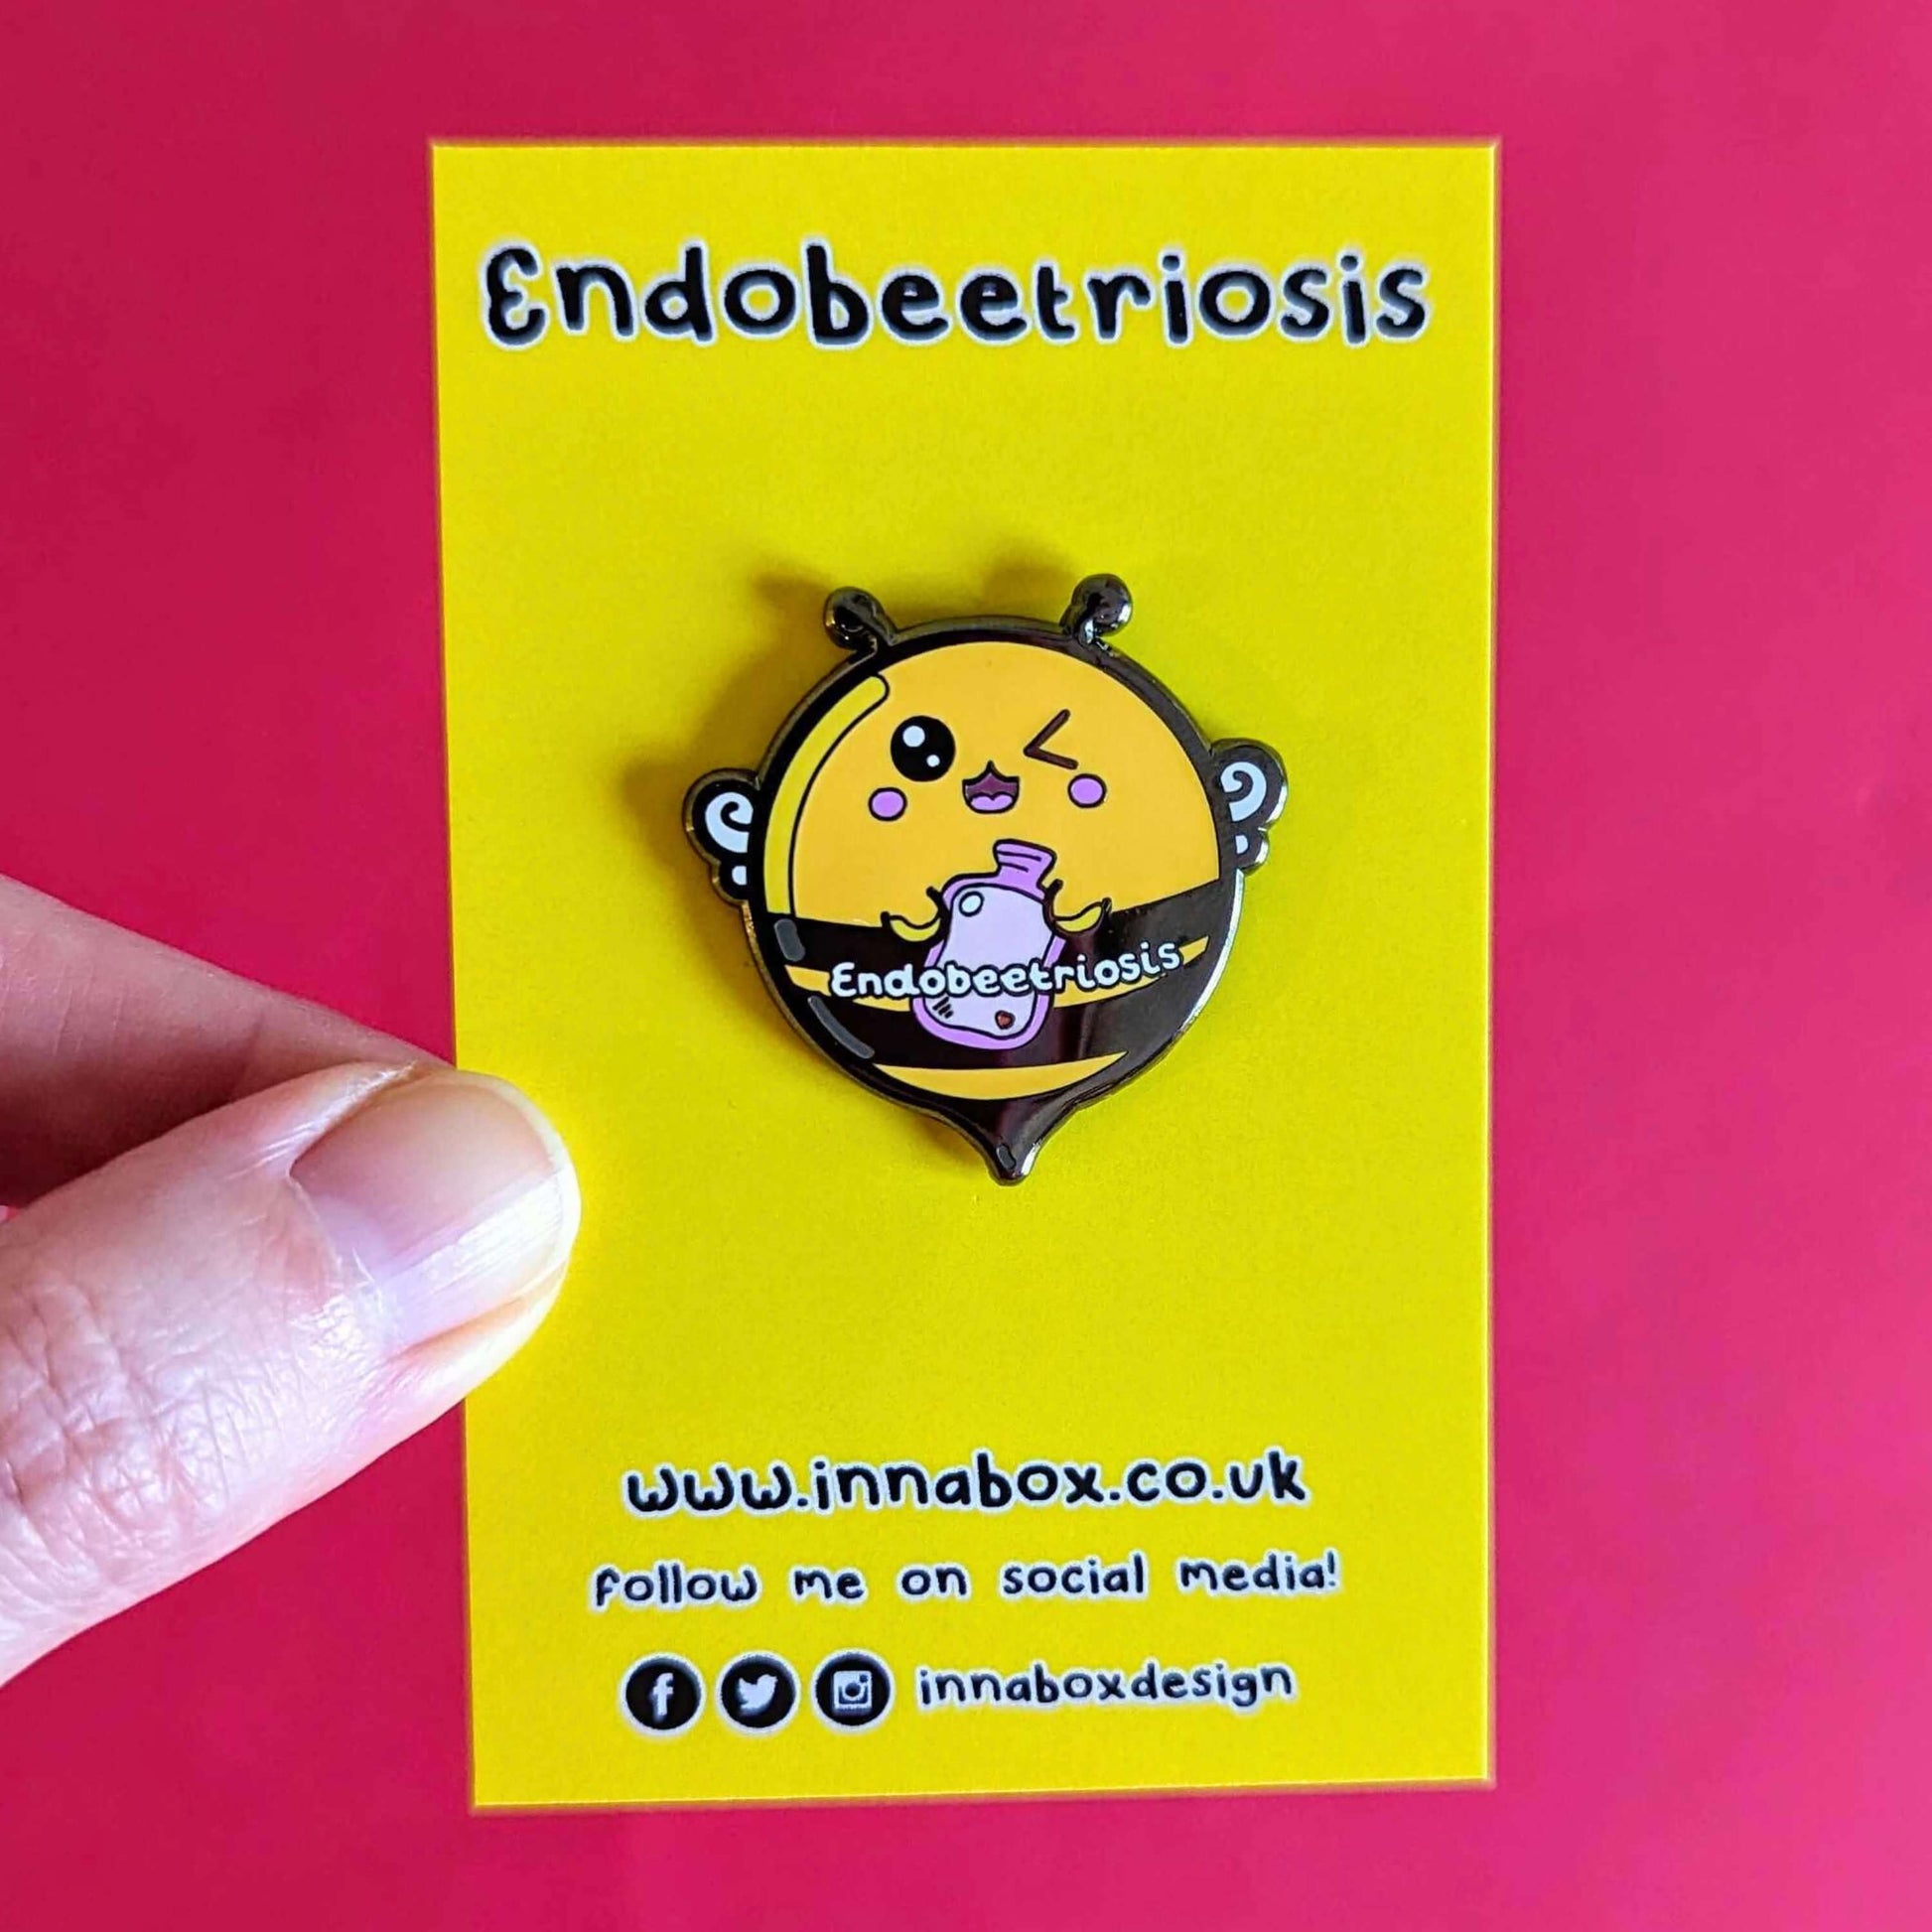 Endobeetriosis 2.0 Bee Enamel Pin - Endometriosis on yellow backing card held over a red background. The enamel pin is a bumble bee with a smiley face and holding a pink hot watterbottle in its hands, across its middle is white text that reads endobeetriosis. The enamel pin is designed to raise awareness for endometriosis